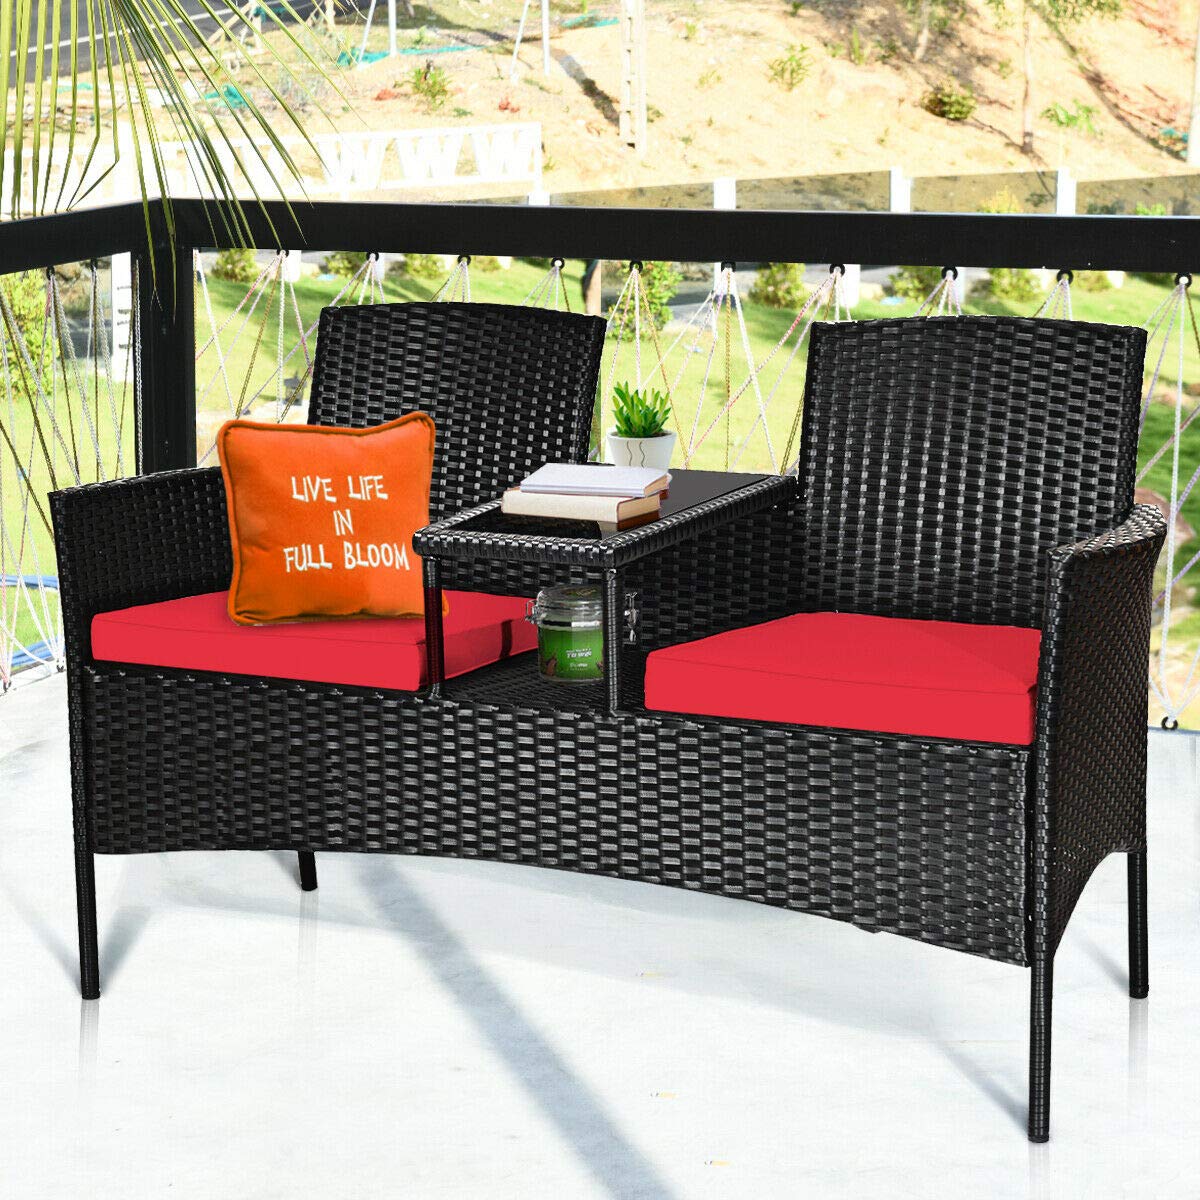 RELAX4LIFE Conversation Furniture Set with Table and Two Removable Cushions Rattan Wicker Chairs and Table Set for Patio,Garden, Baloney and Lawn Outdoor Porch Furniture Sets Loveseat (Black+Red)